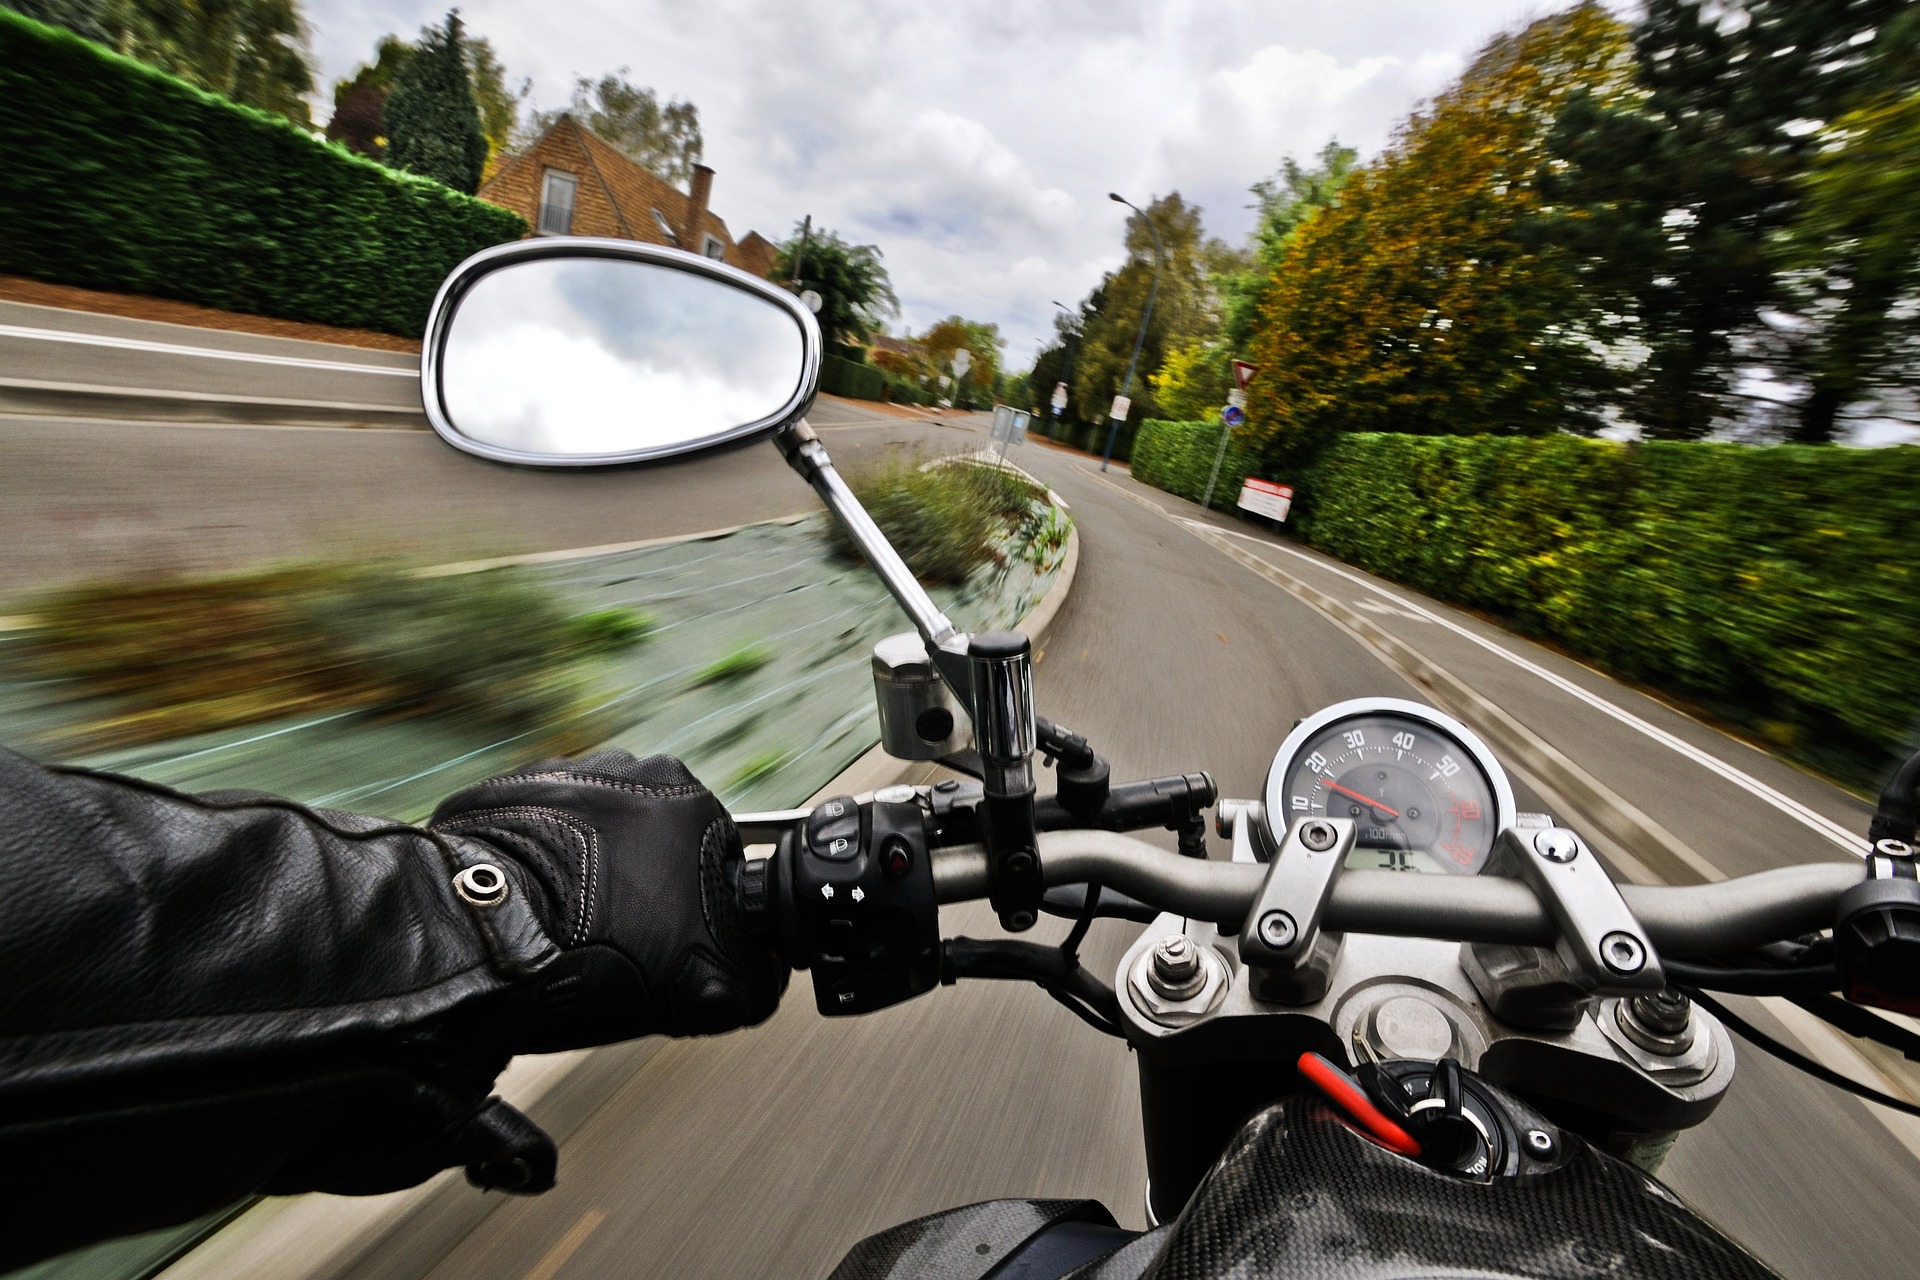 A rear view mirror of a motorbike going really fast.